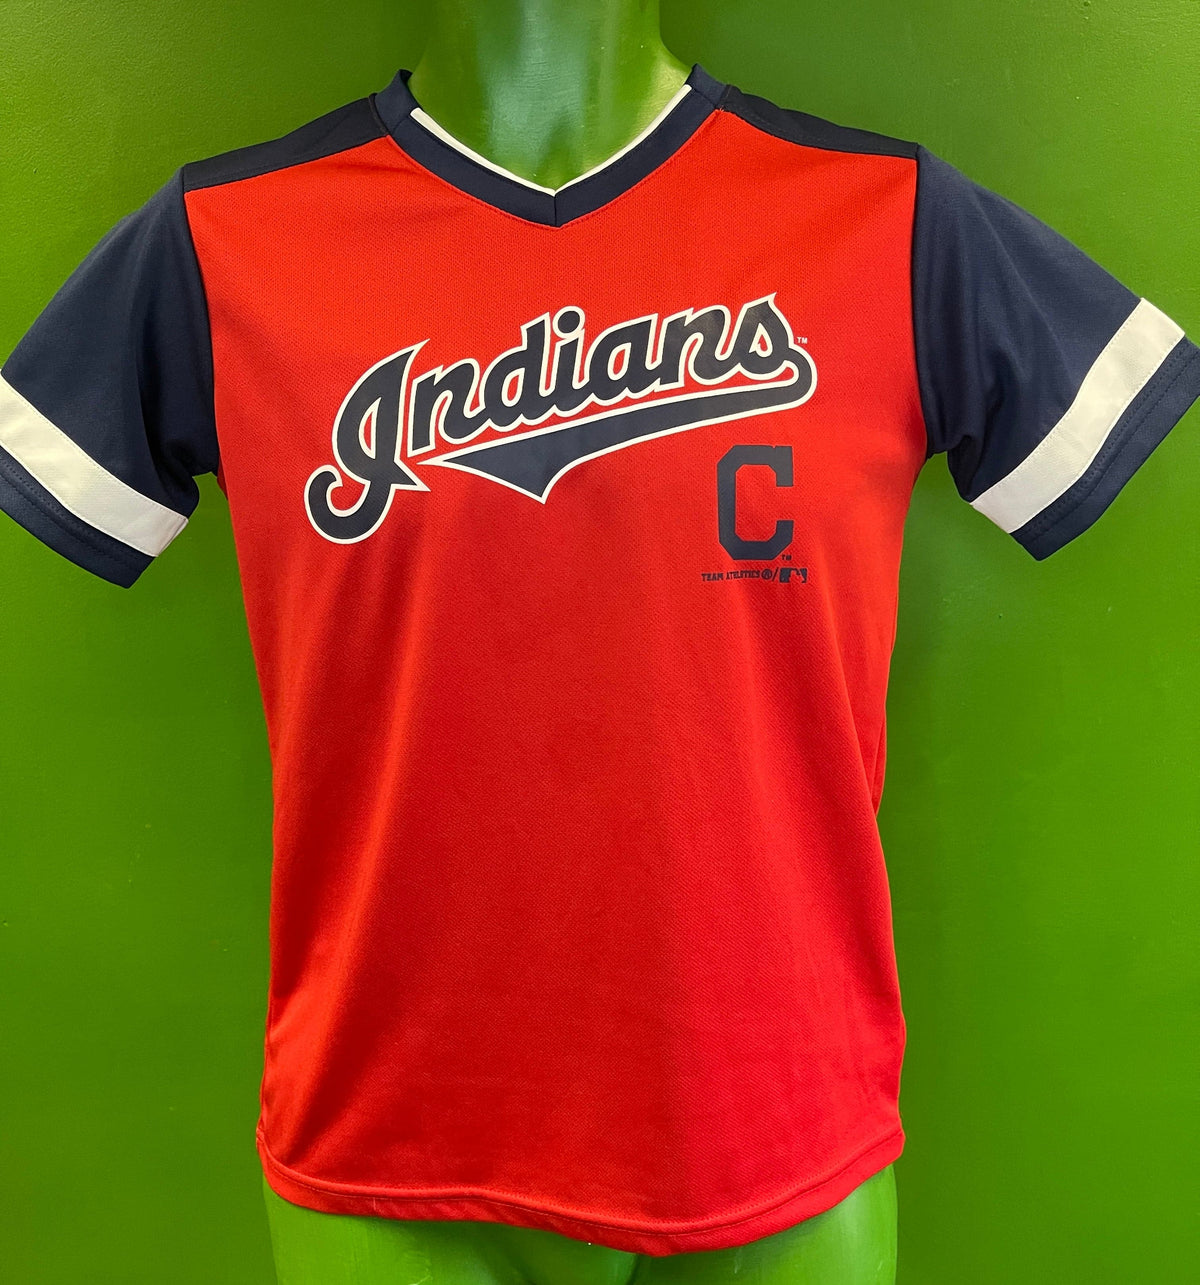 MLB Cleveland Guardians (Indians) Logo Jersey-Style Top Youth Large 10-12